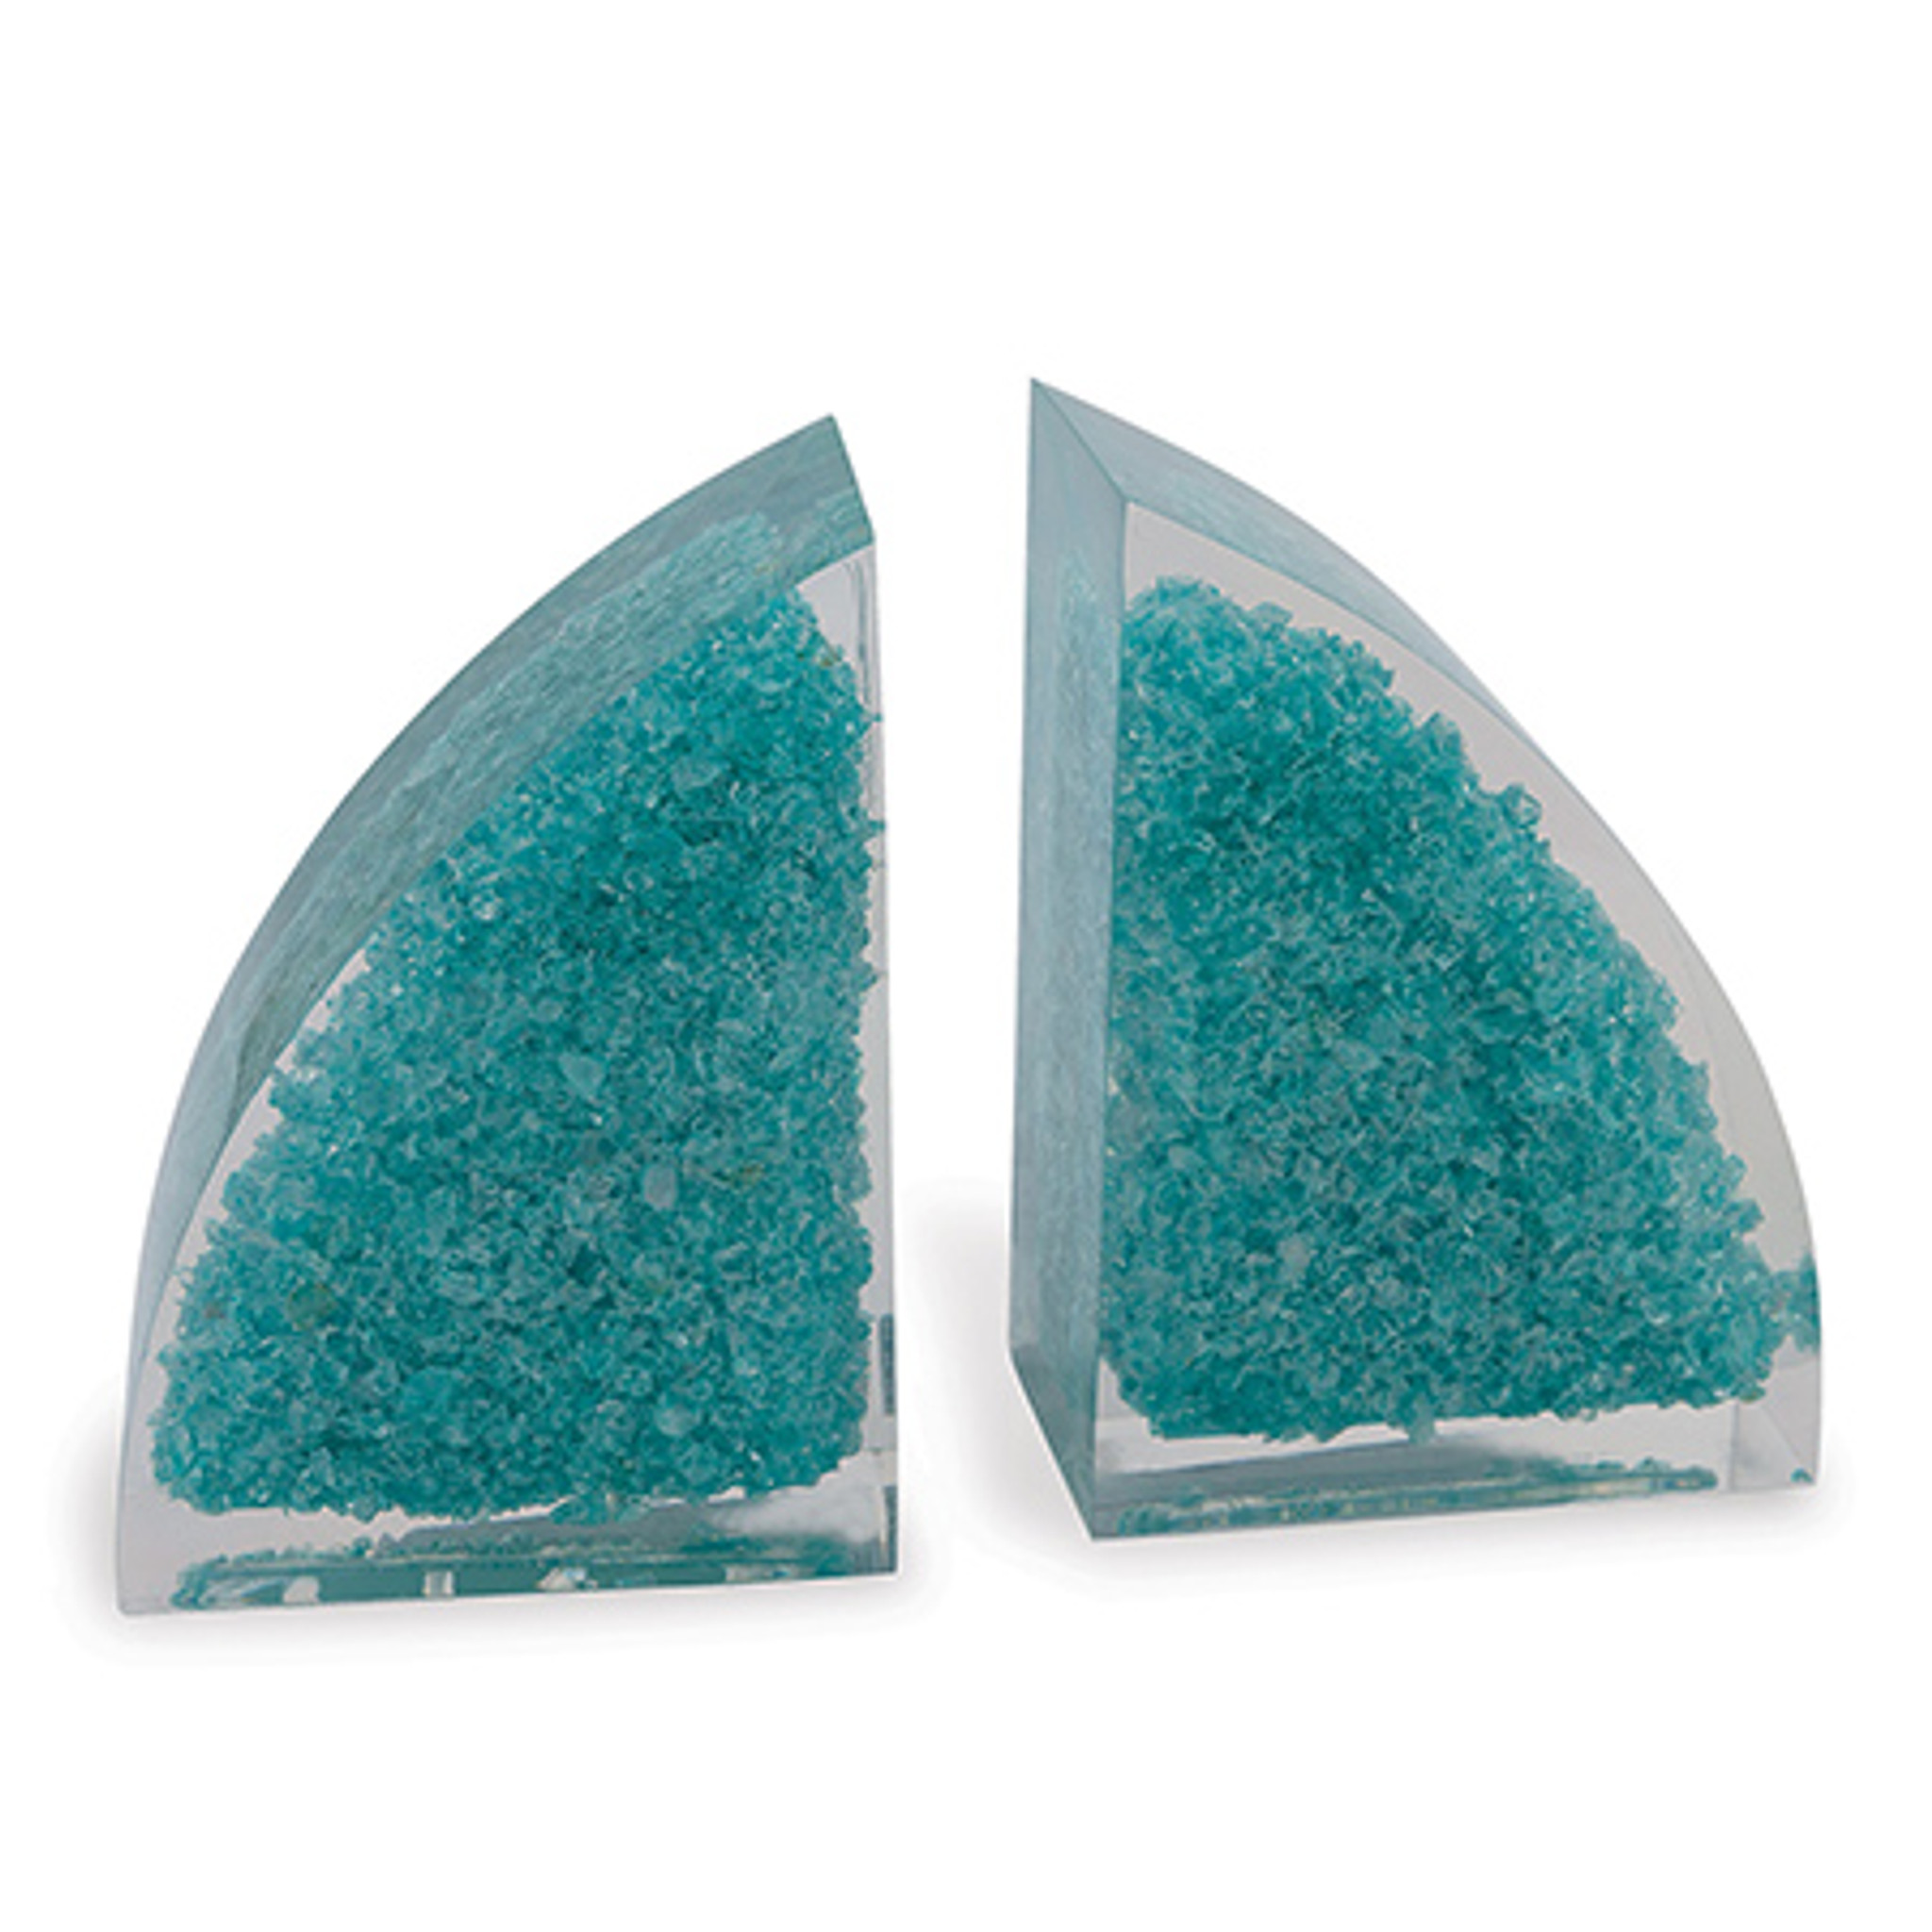 Turquoise Quartz and Clear Resin Half Moon Bookends,